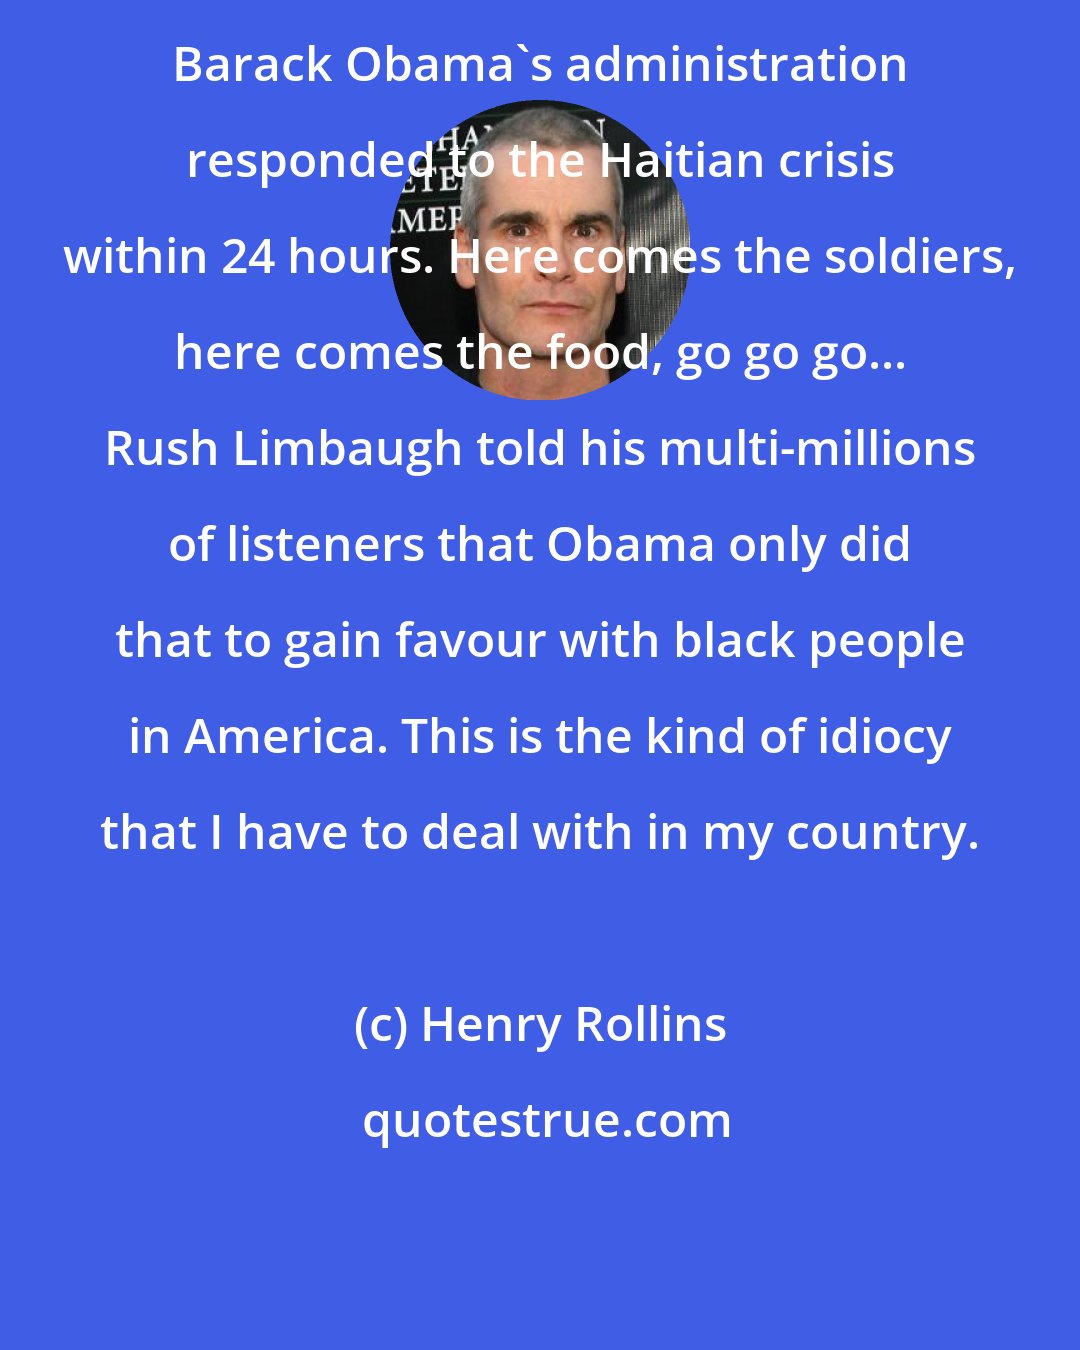 Henry Rollins: Barack Obama's administration responded to the Haitian crisis within 24 hours. Here comes the soldiers, here comes the food, go go go... Rush Limbaugh told his multi-millions of listeners that Obama only did that to gain favour with black people in America. This is the kind of idiocy that I have to deal with in my country.